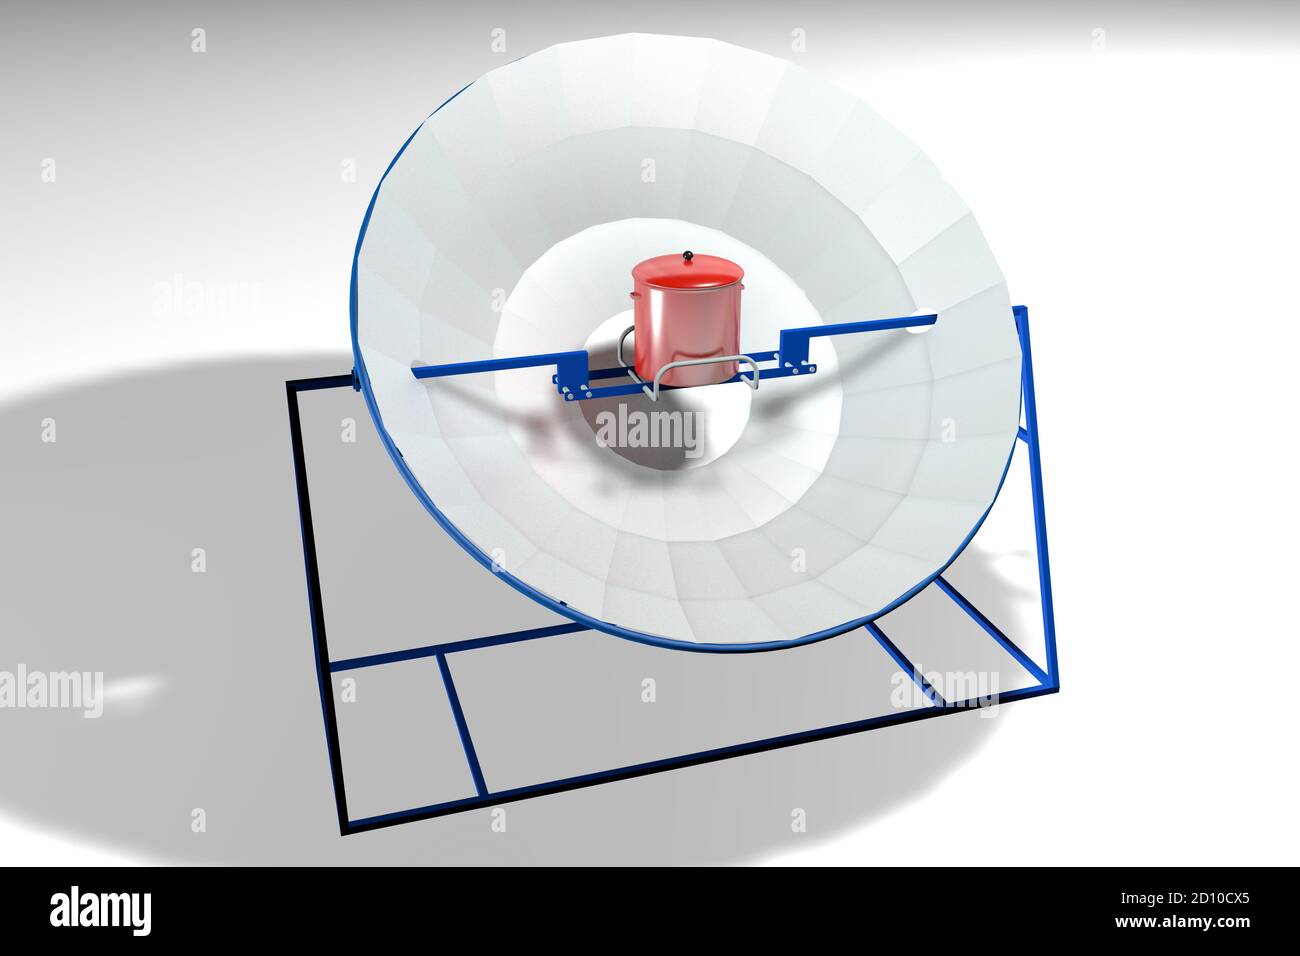 Parabolic solar cooker model with blue structure with a red pot on a white background. 3D Illustration Stock Photo